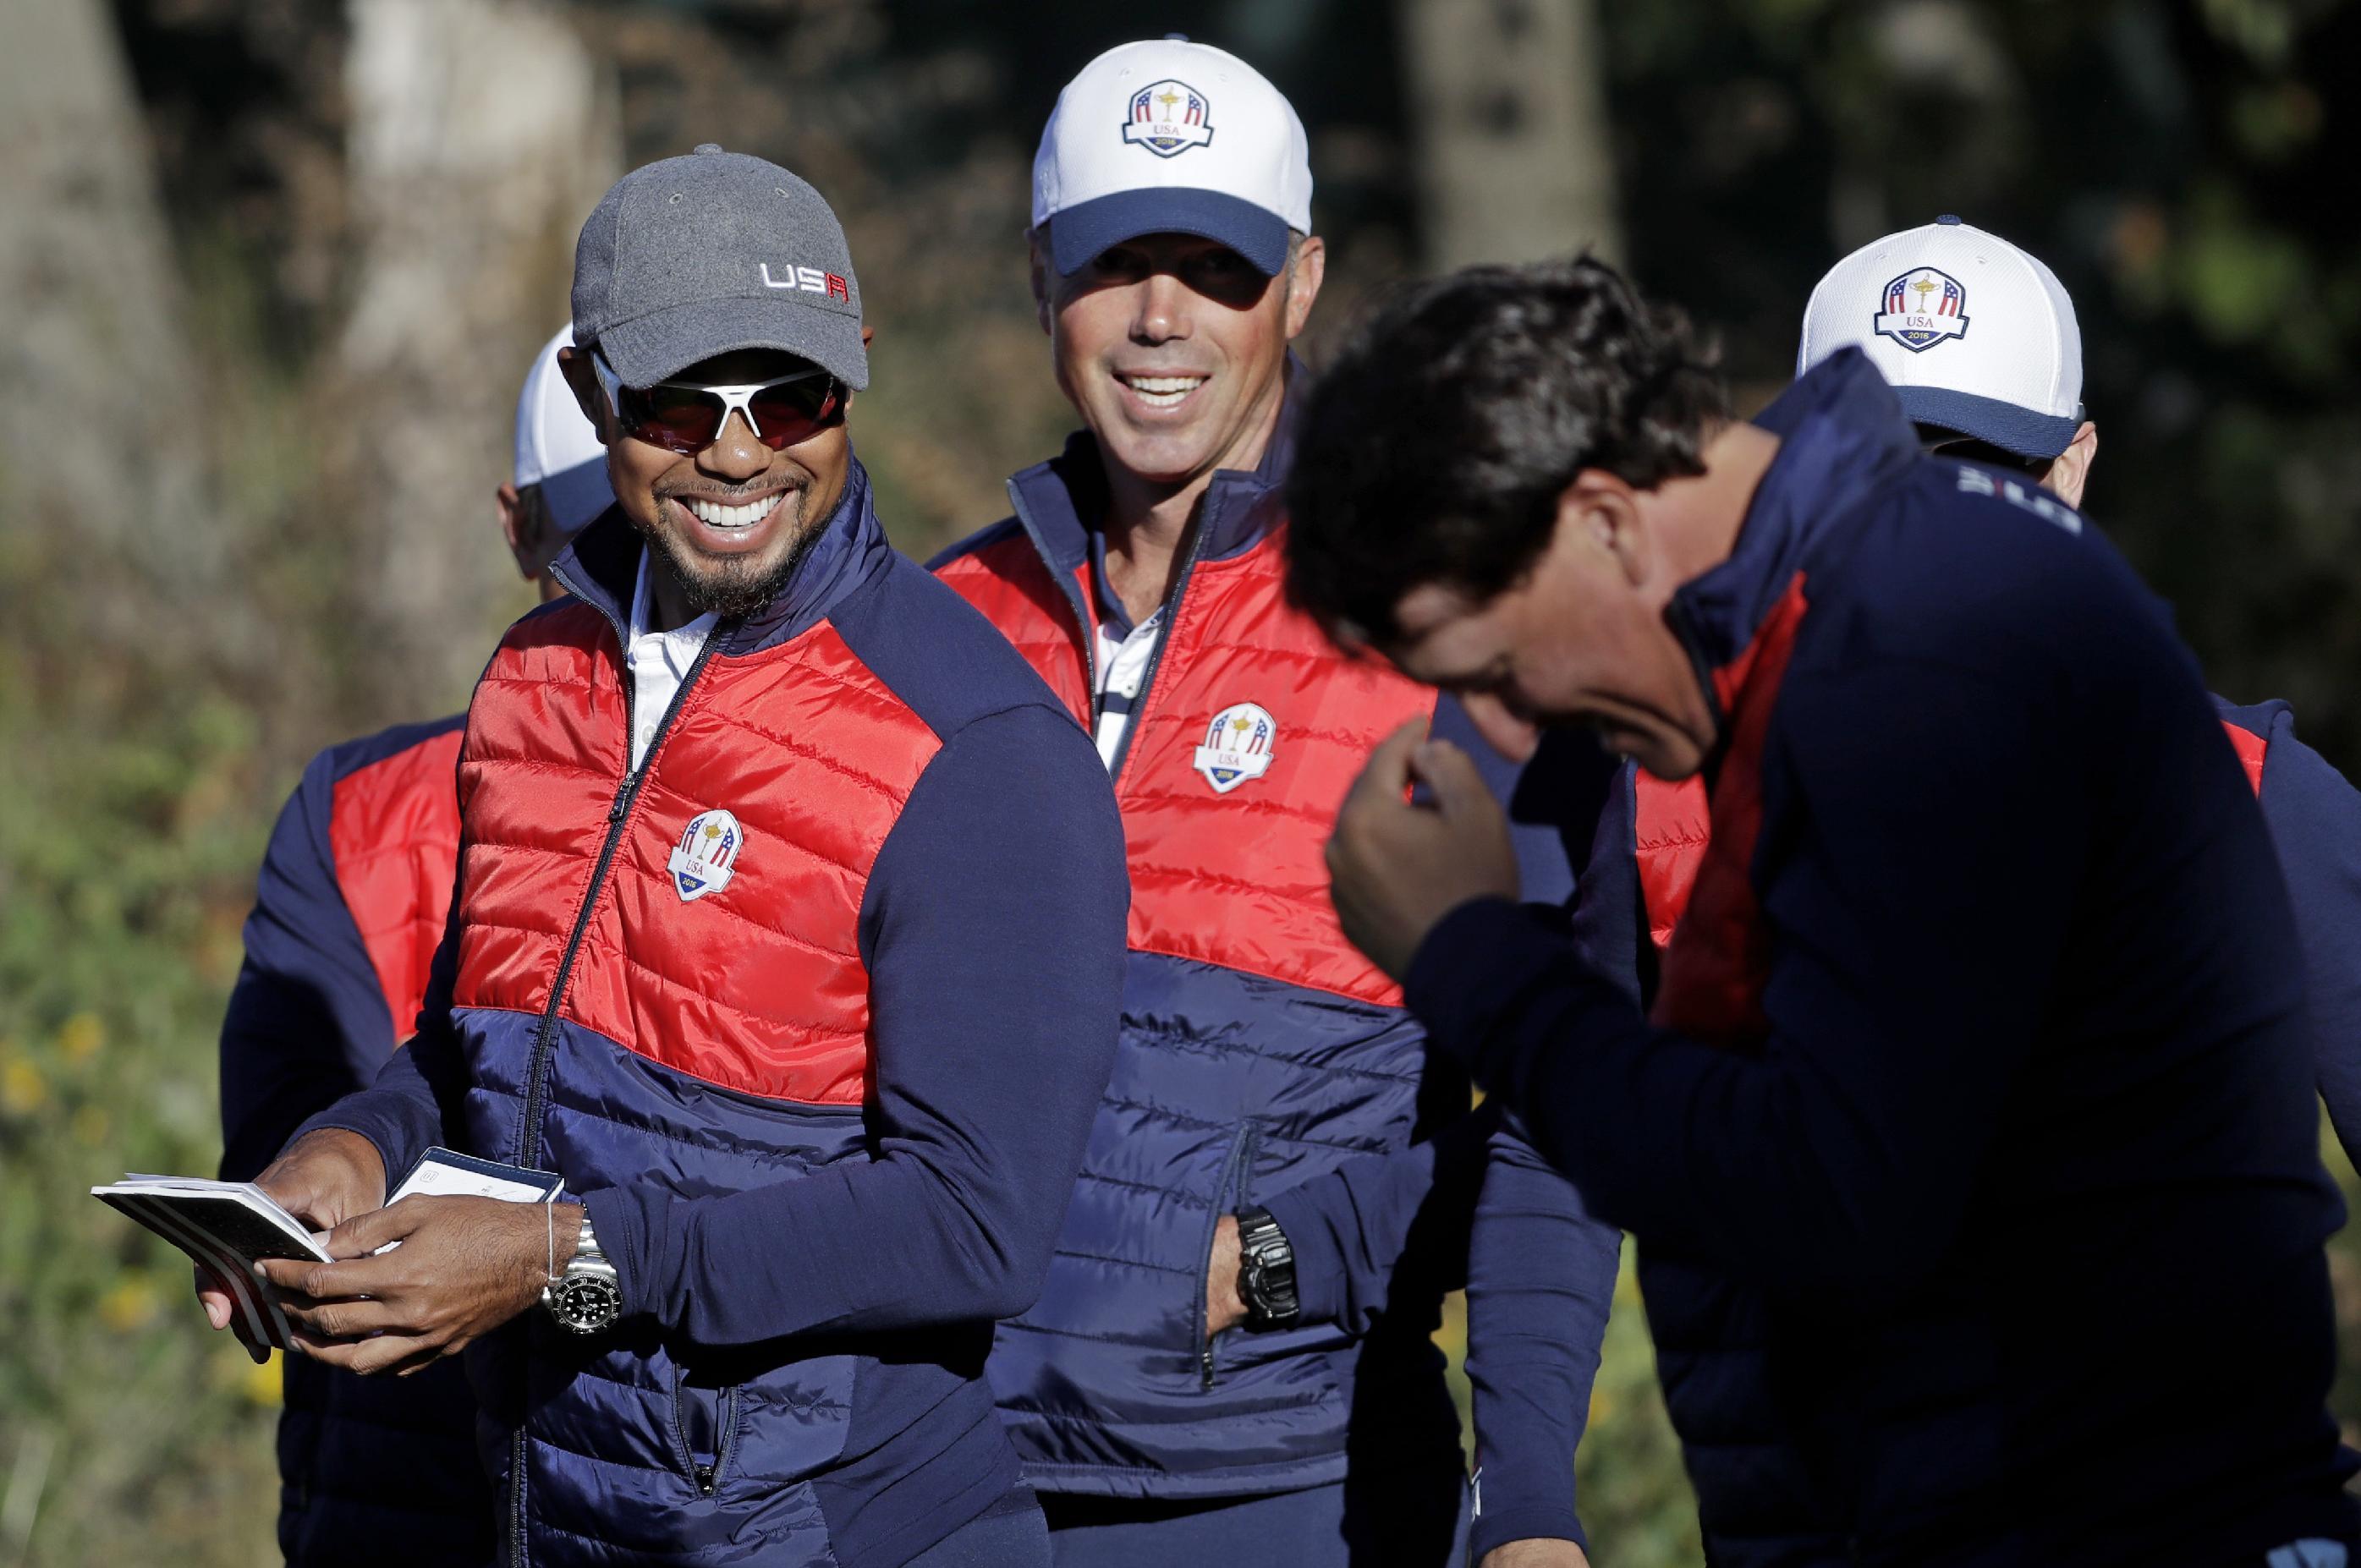 Tiger Woods, left, and Phil Mickelson, right, share a laugh in preparation for the Ryder Cup. (AP)